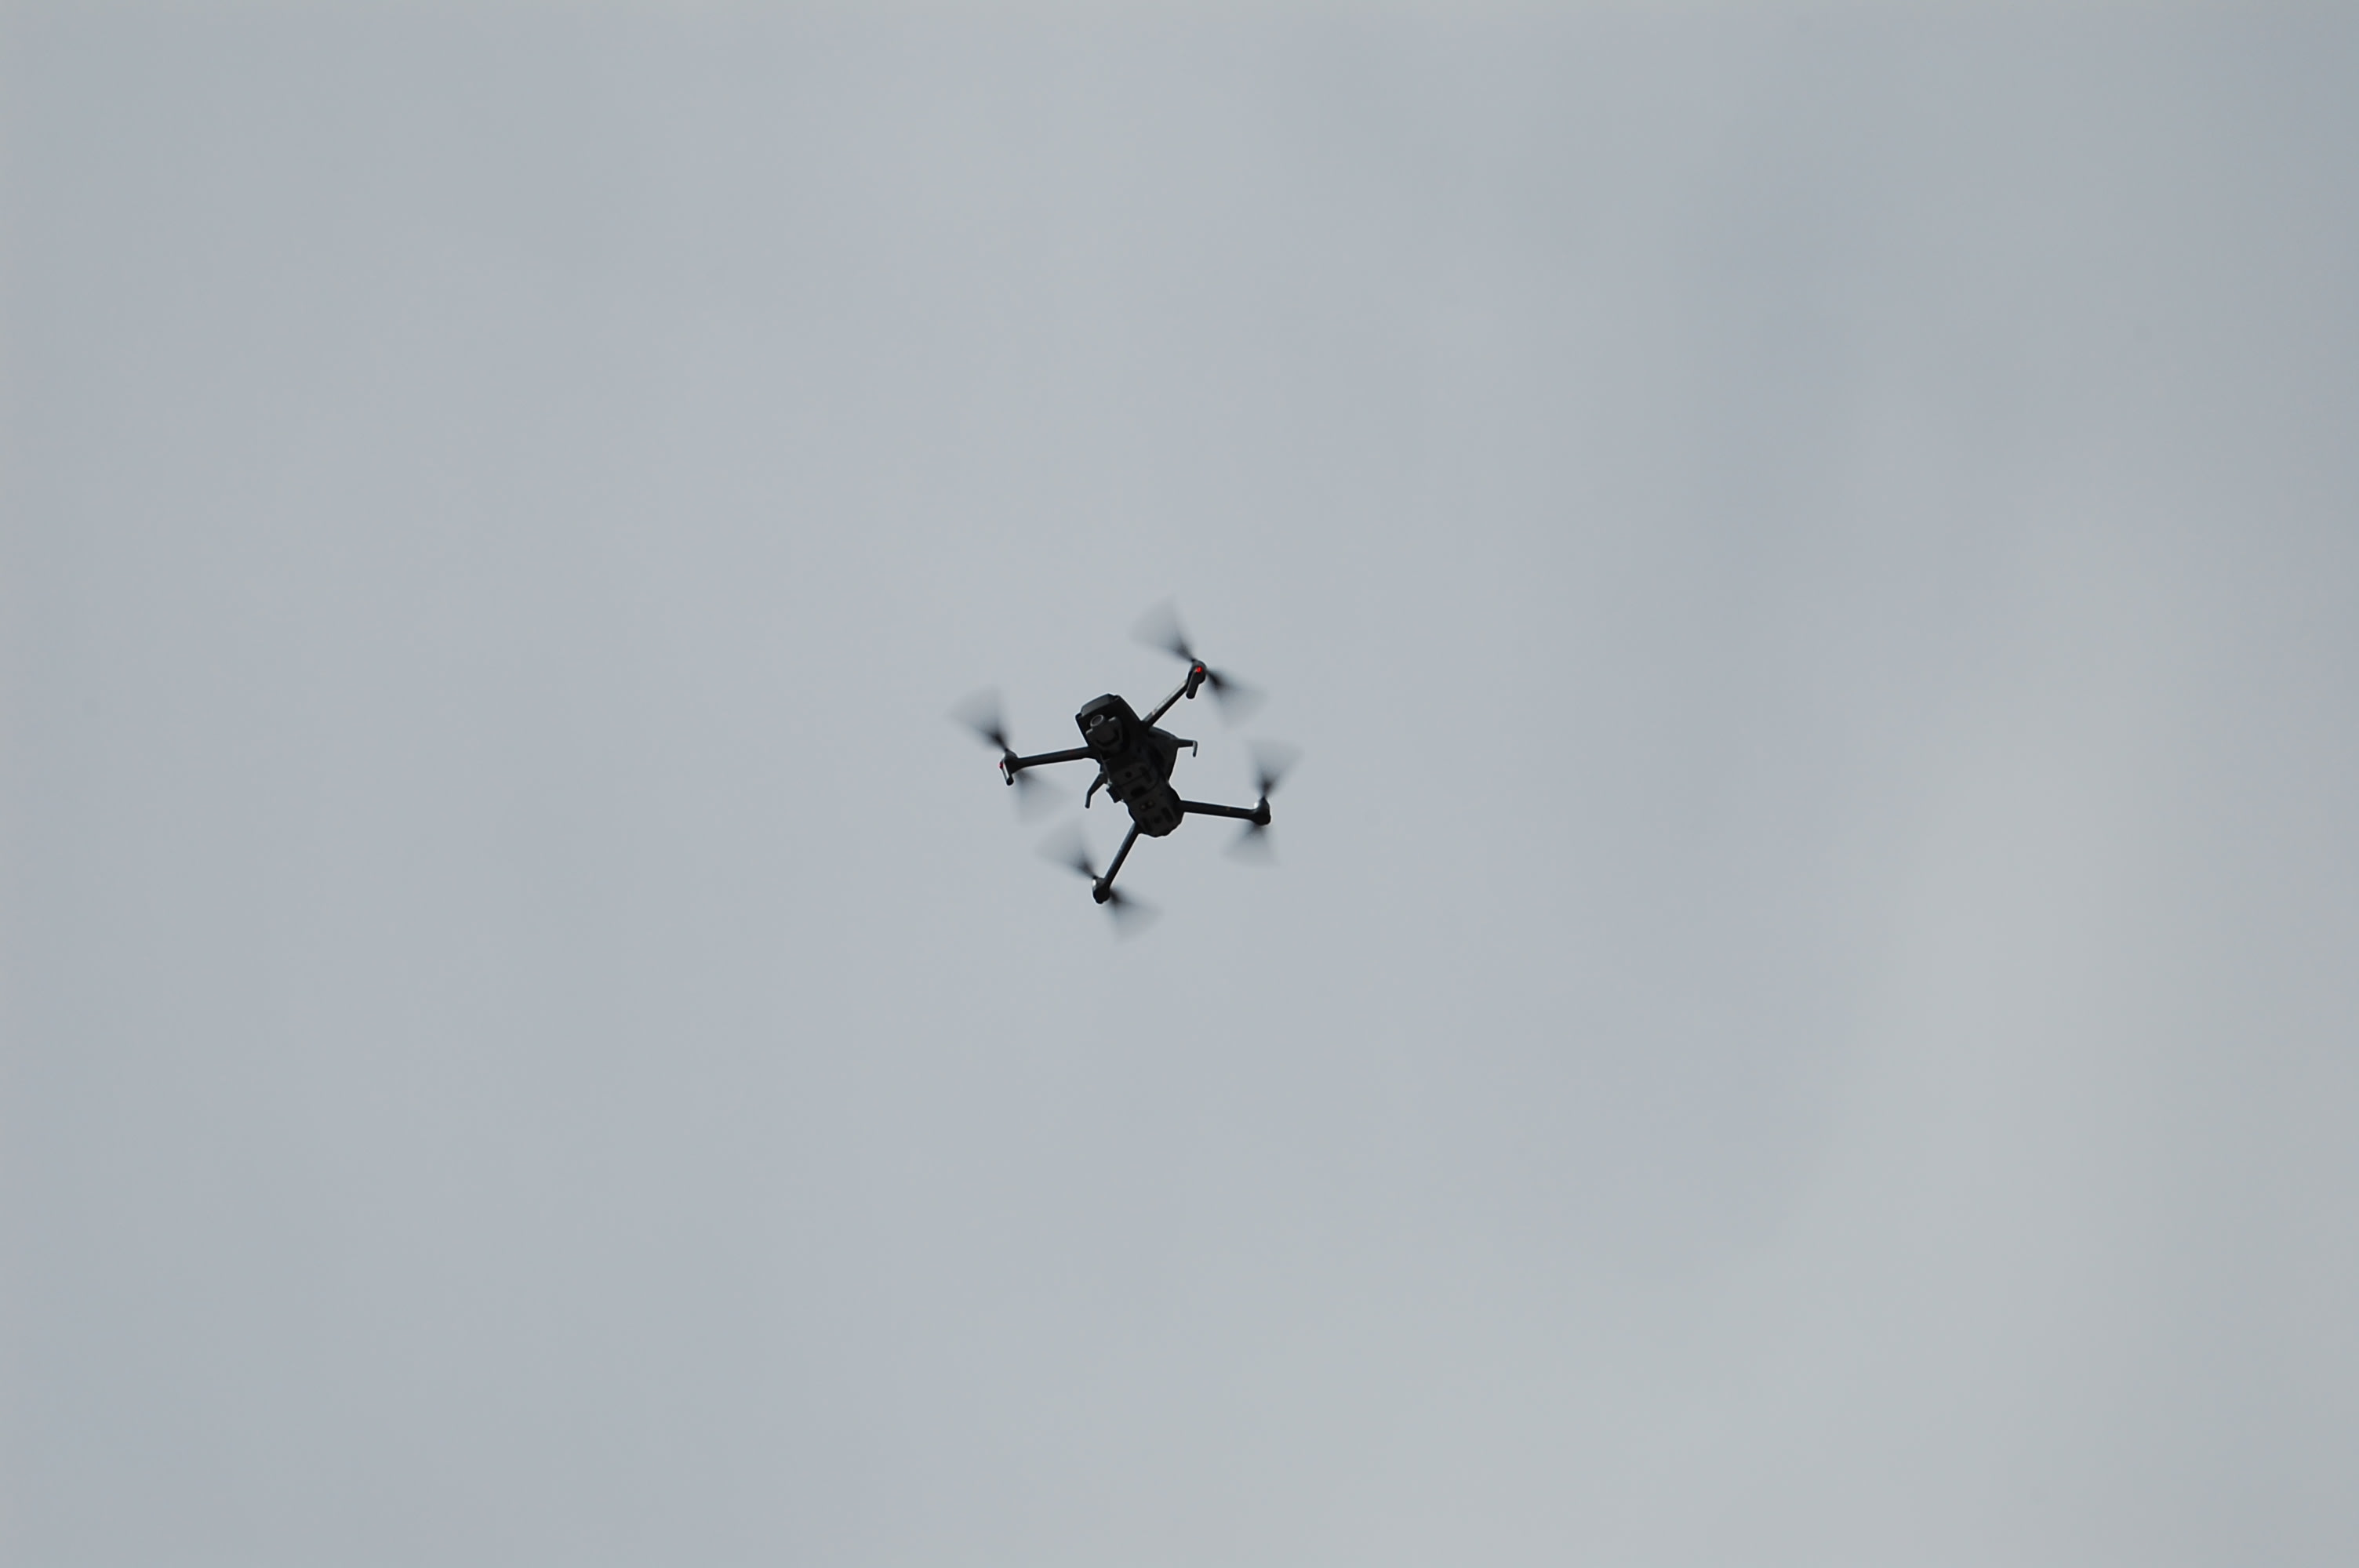 the drone in the sky.